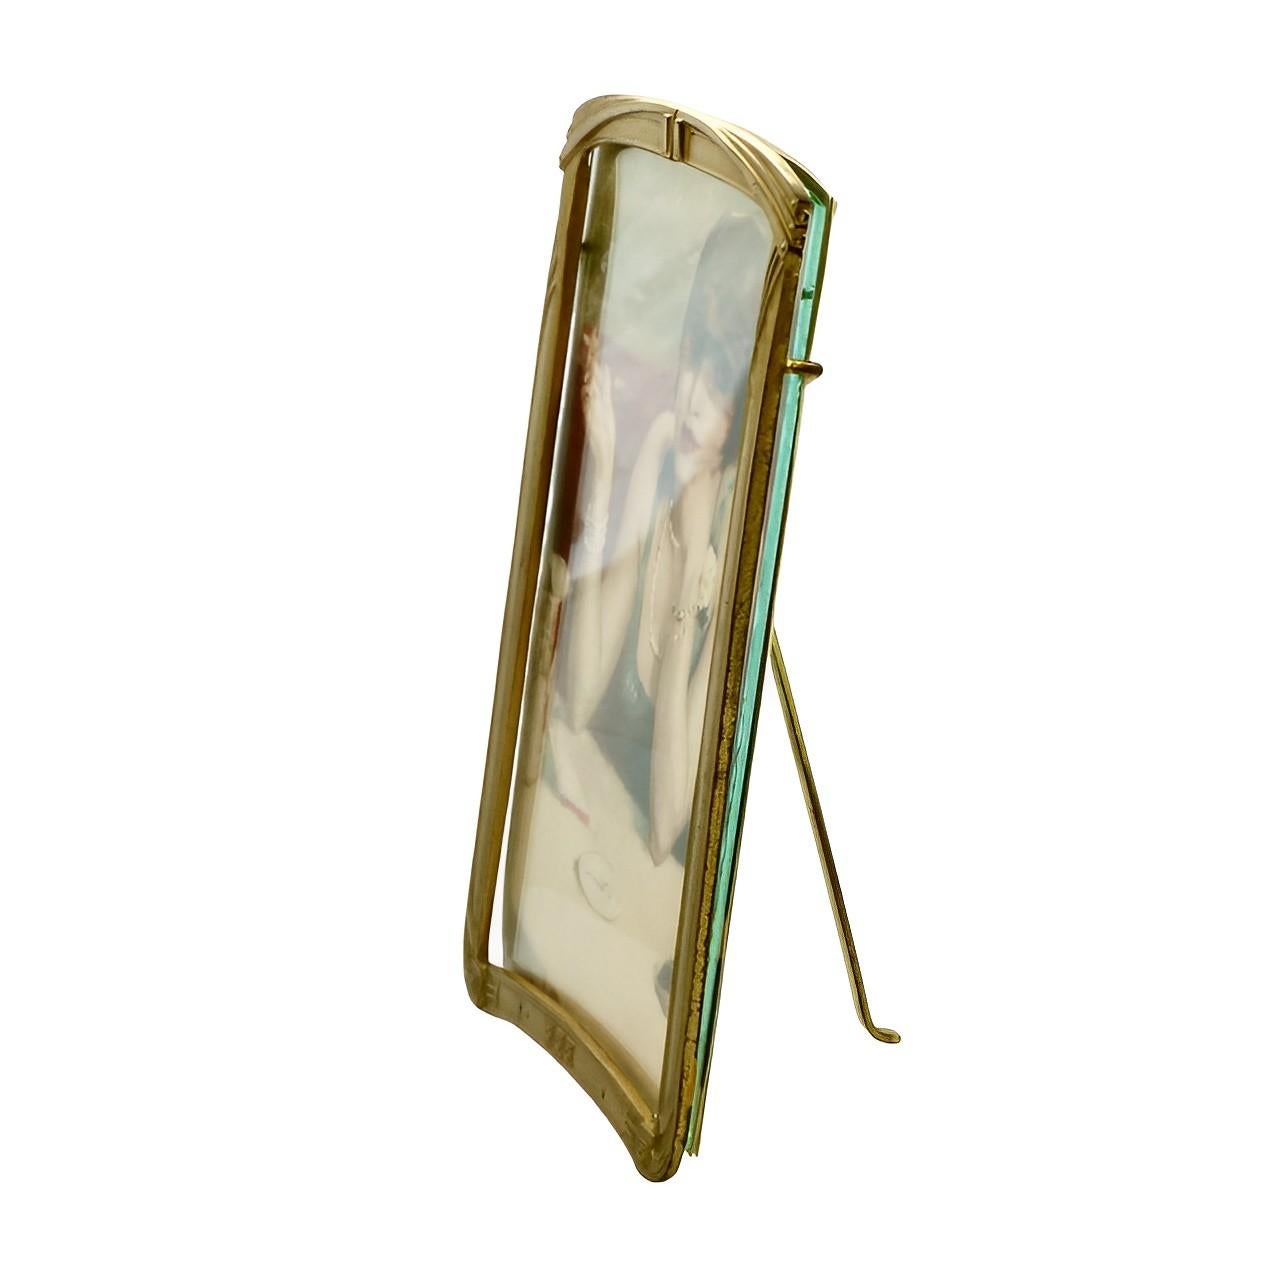 Lovely Art Deco gilt metal picture frame in a classic design, with inset glass and a picture of a flapper. The frame has a metal support support arm which works well.

Measuring width 12.1 cm / 4.76 inches by height 17.6 cm / 6.9 inches, and depth 5